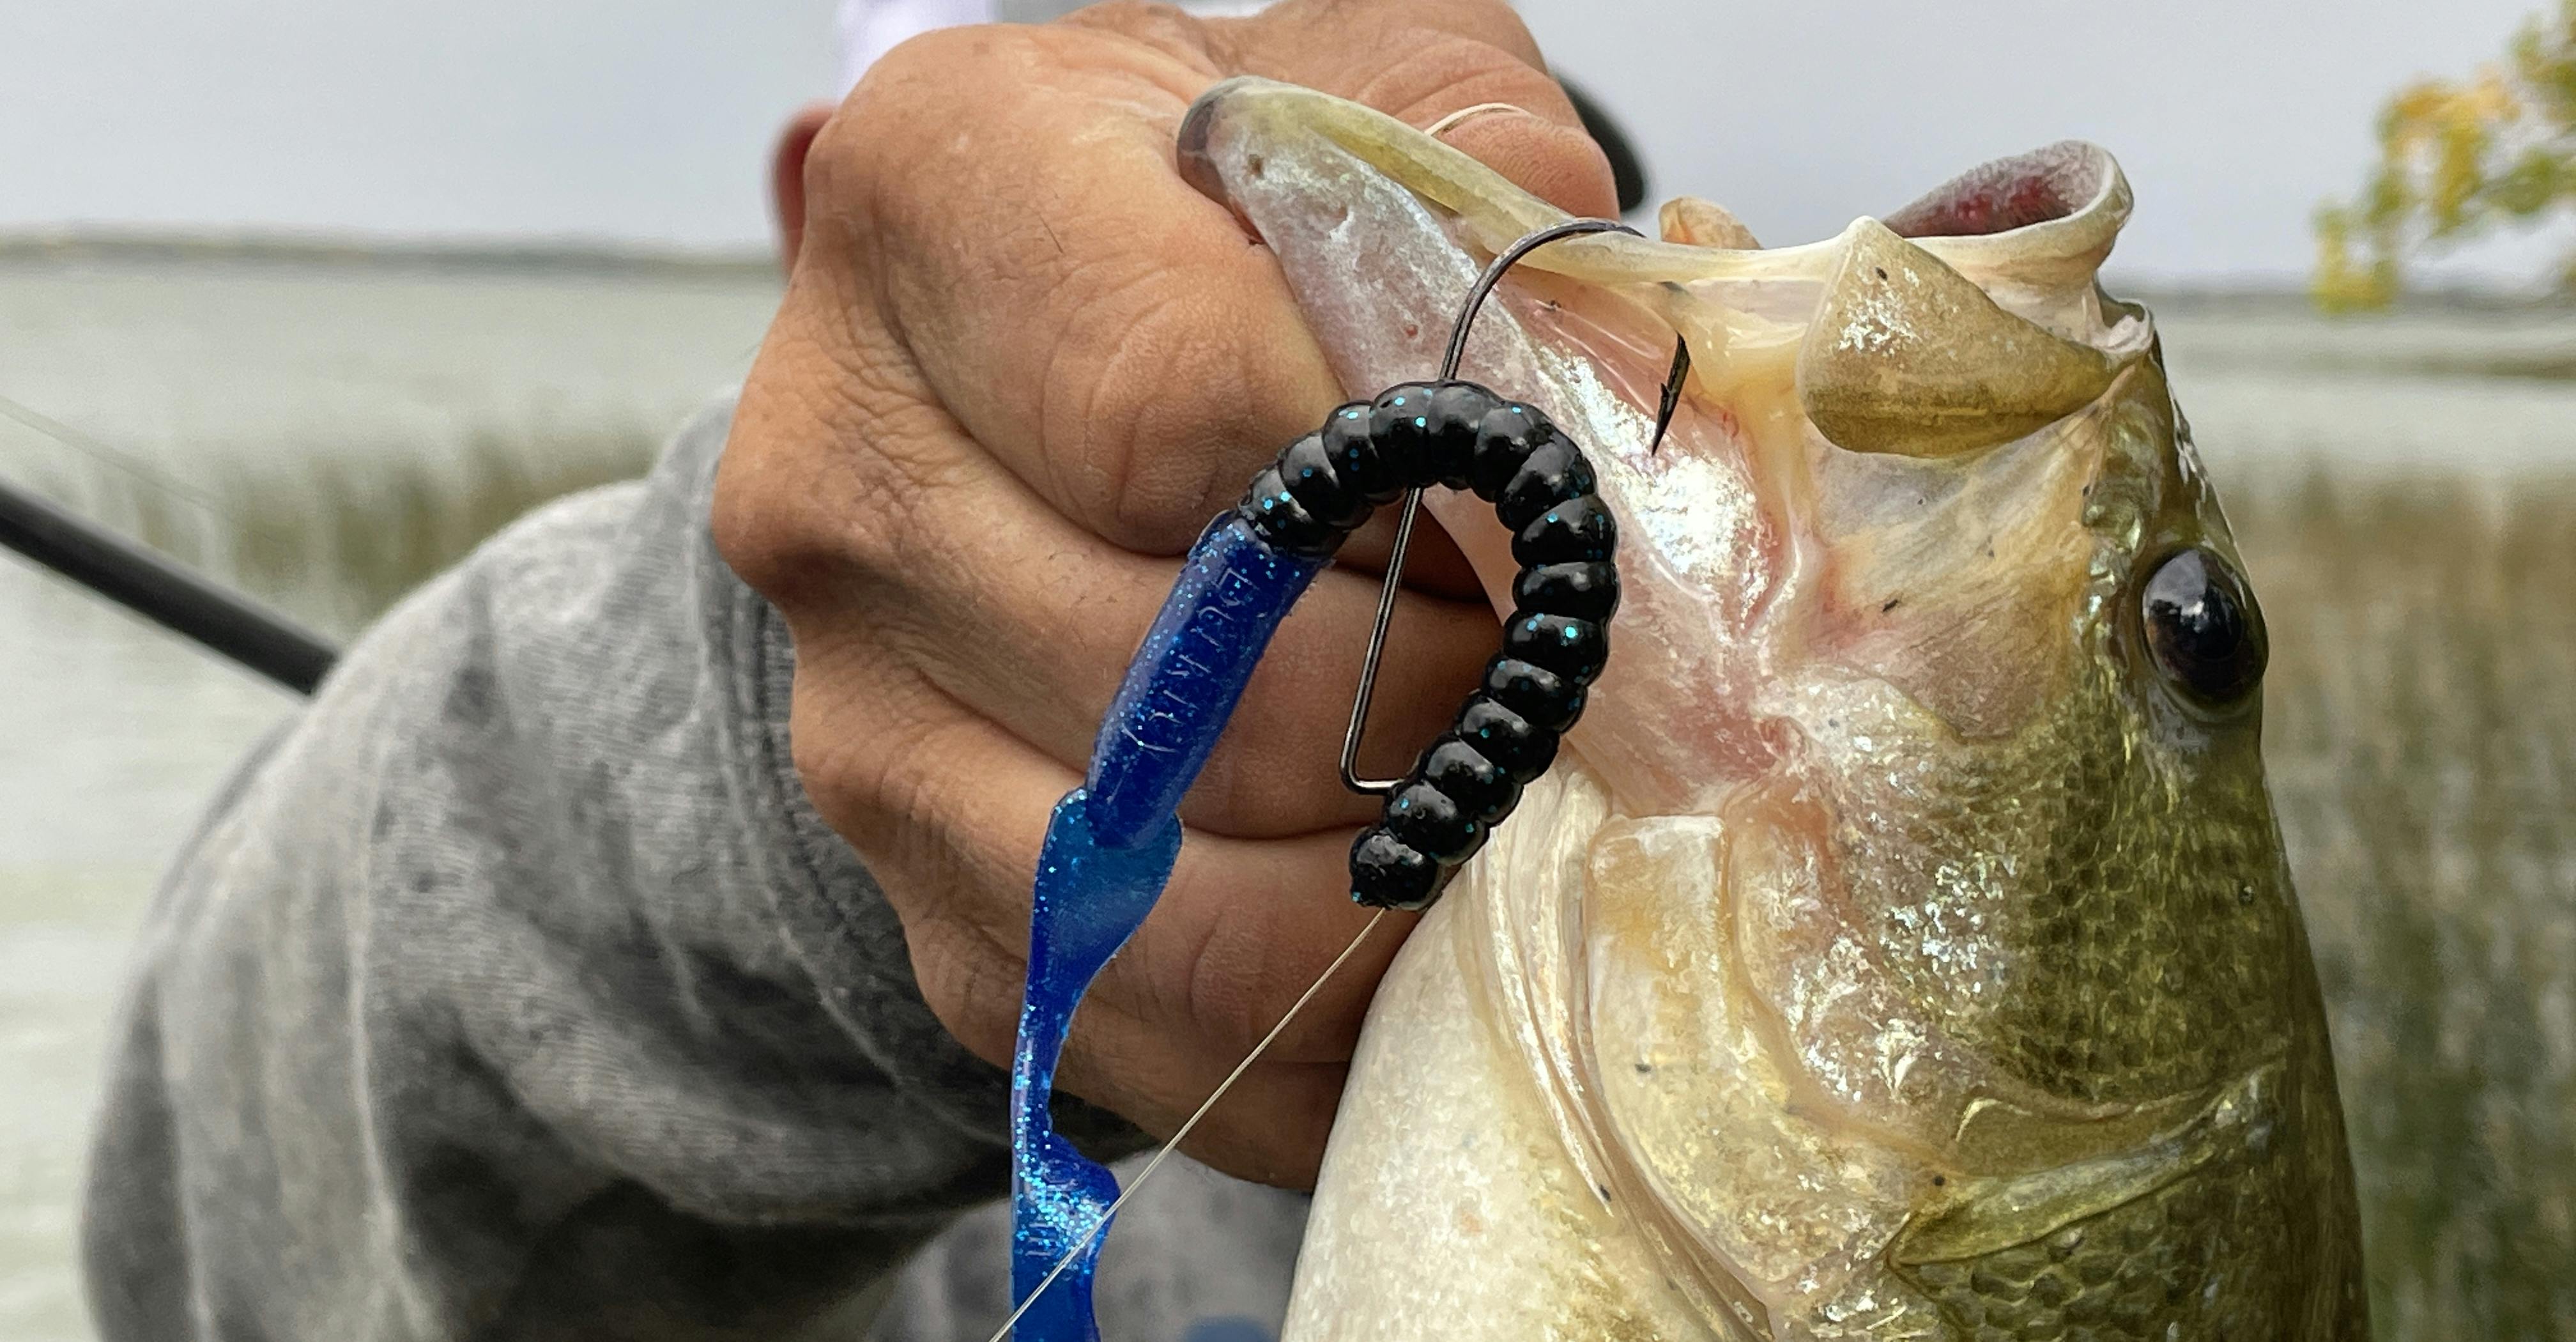 Best Sellers: The most popular items in Fishing Rigs